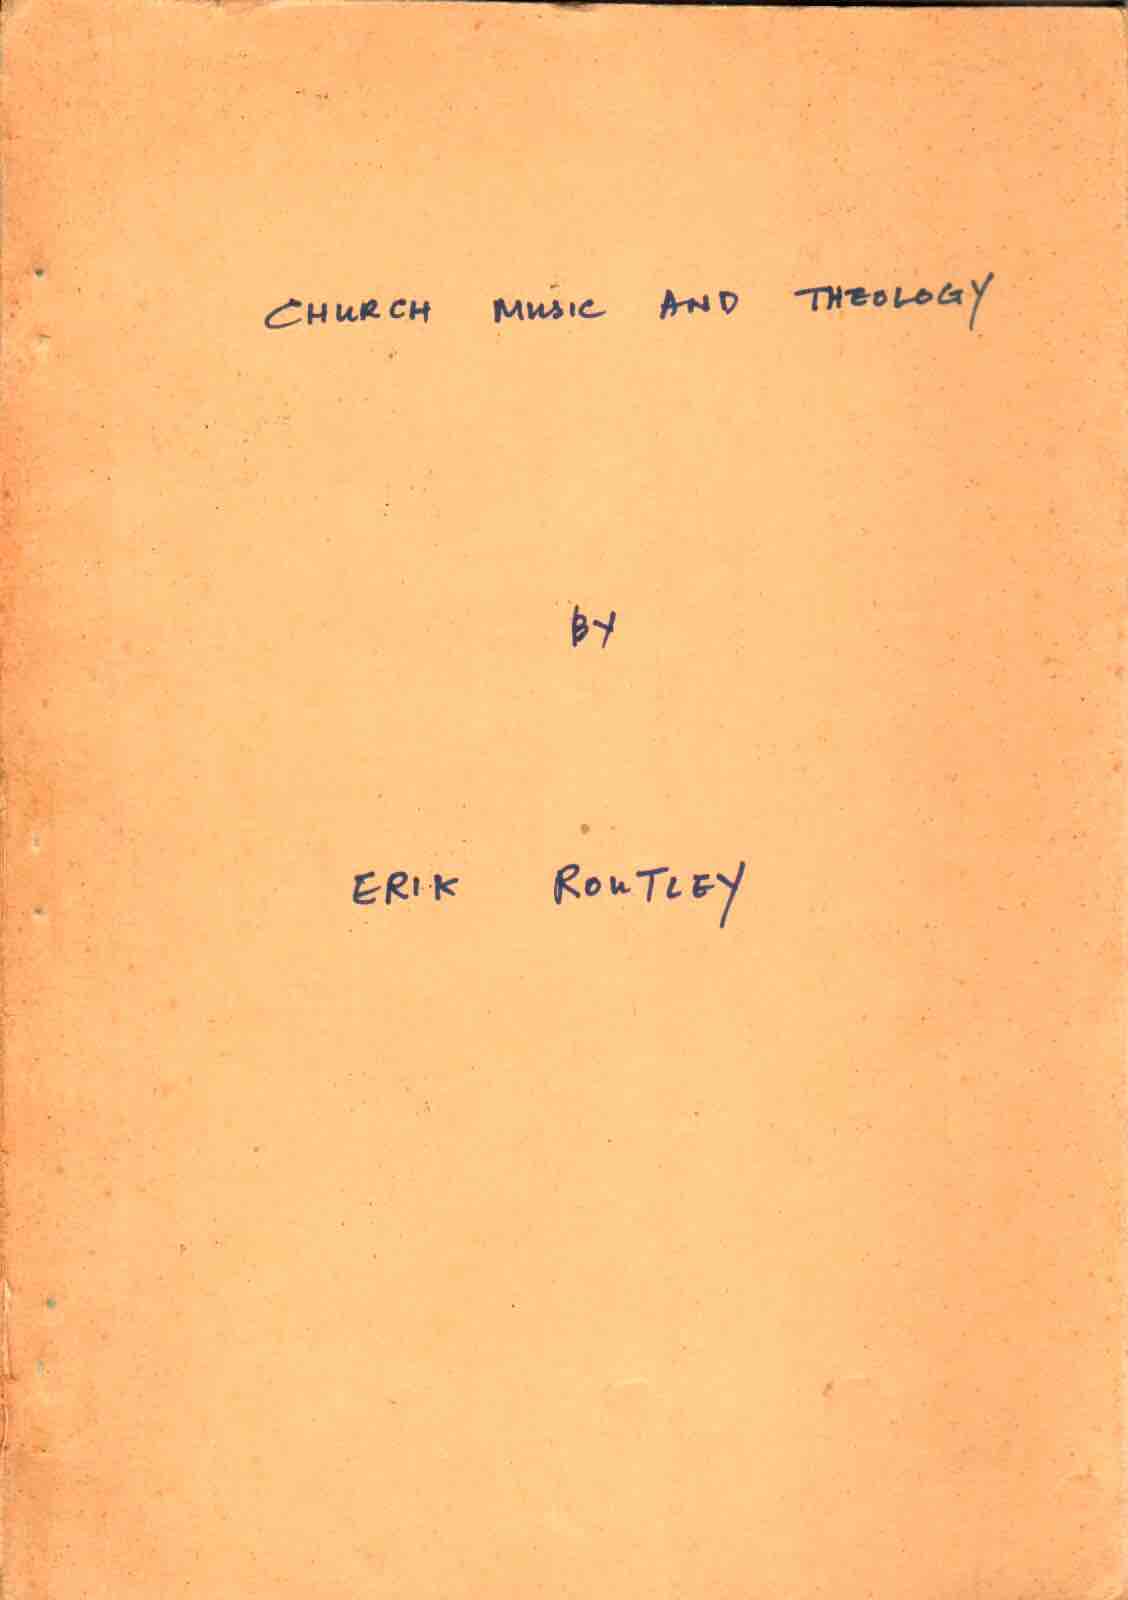 Cover of Church Music and Theology